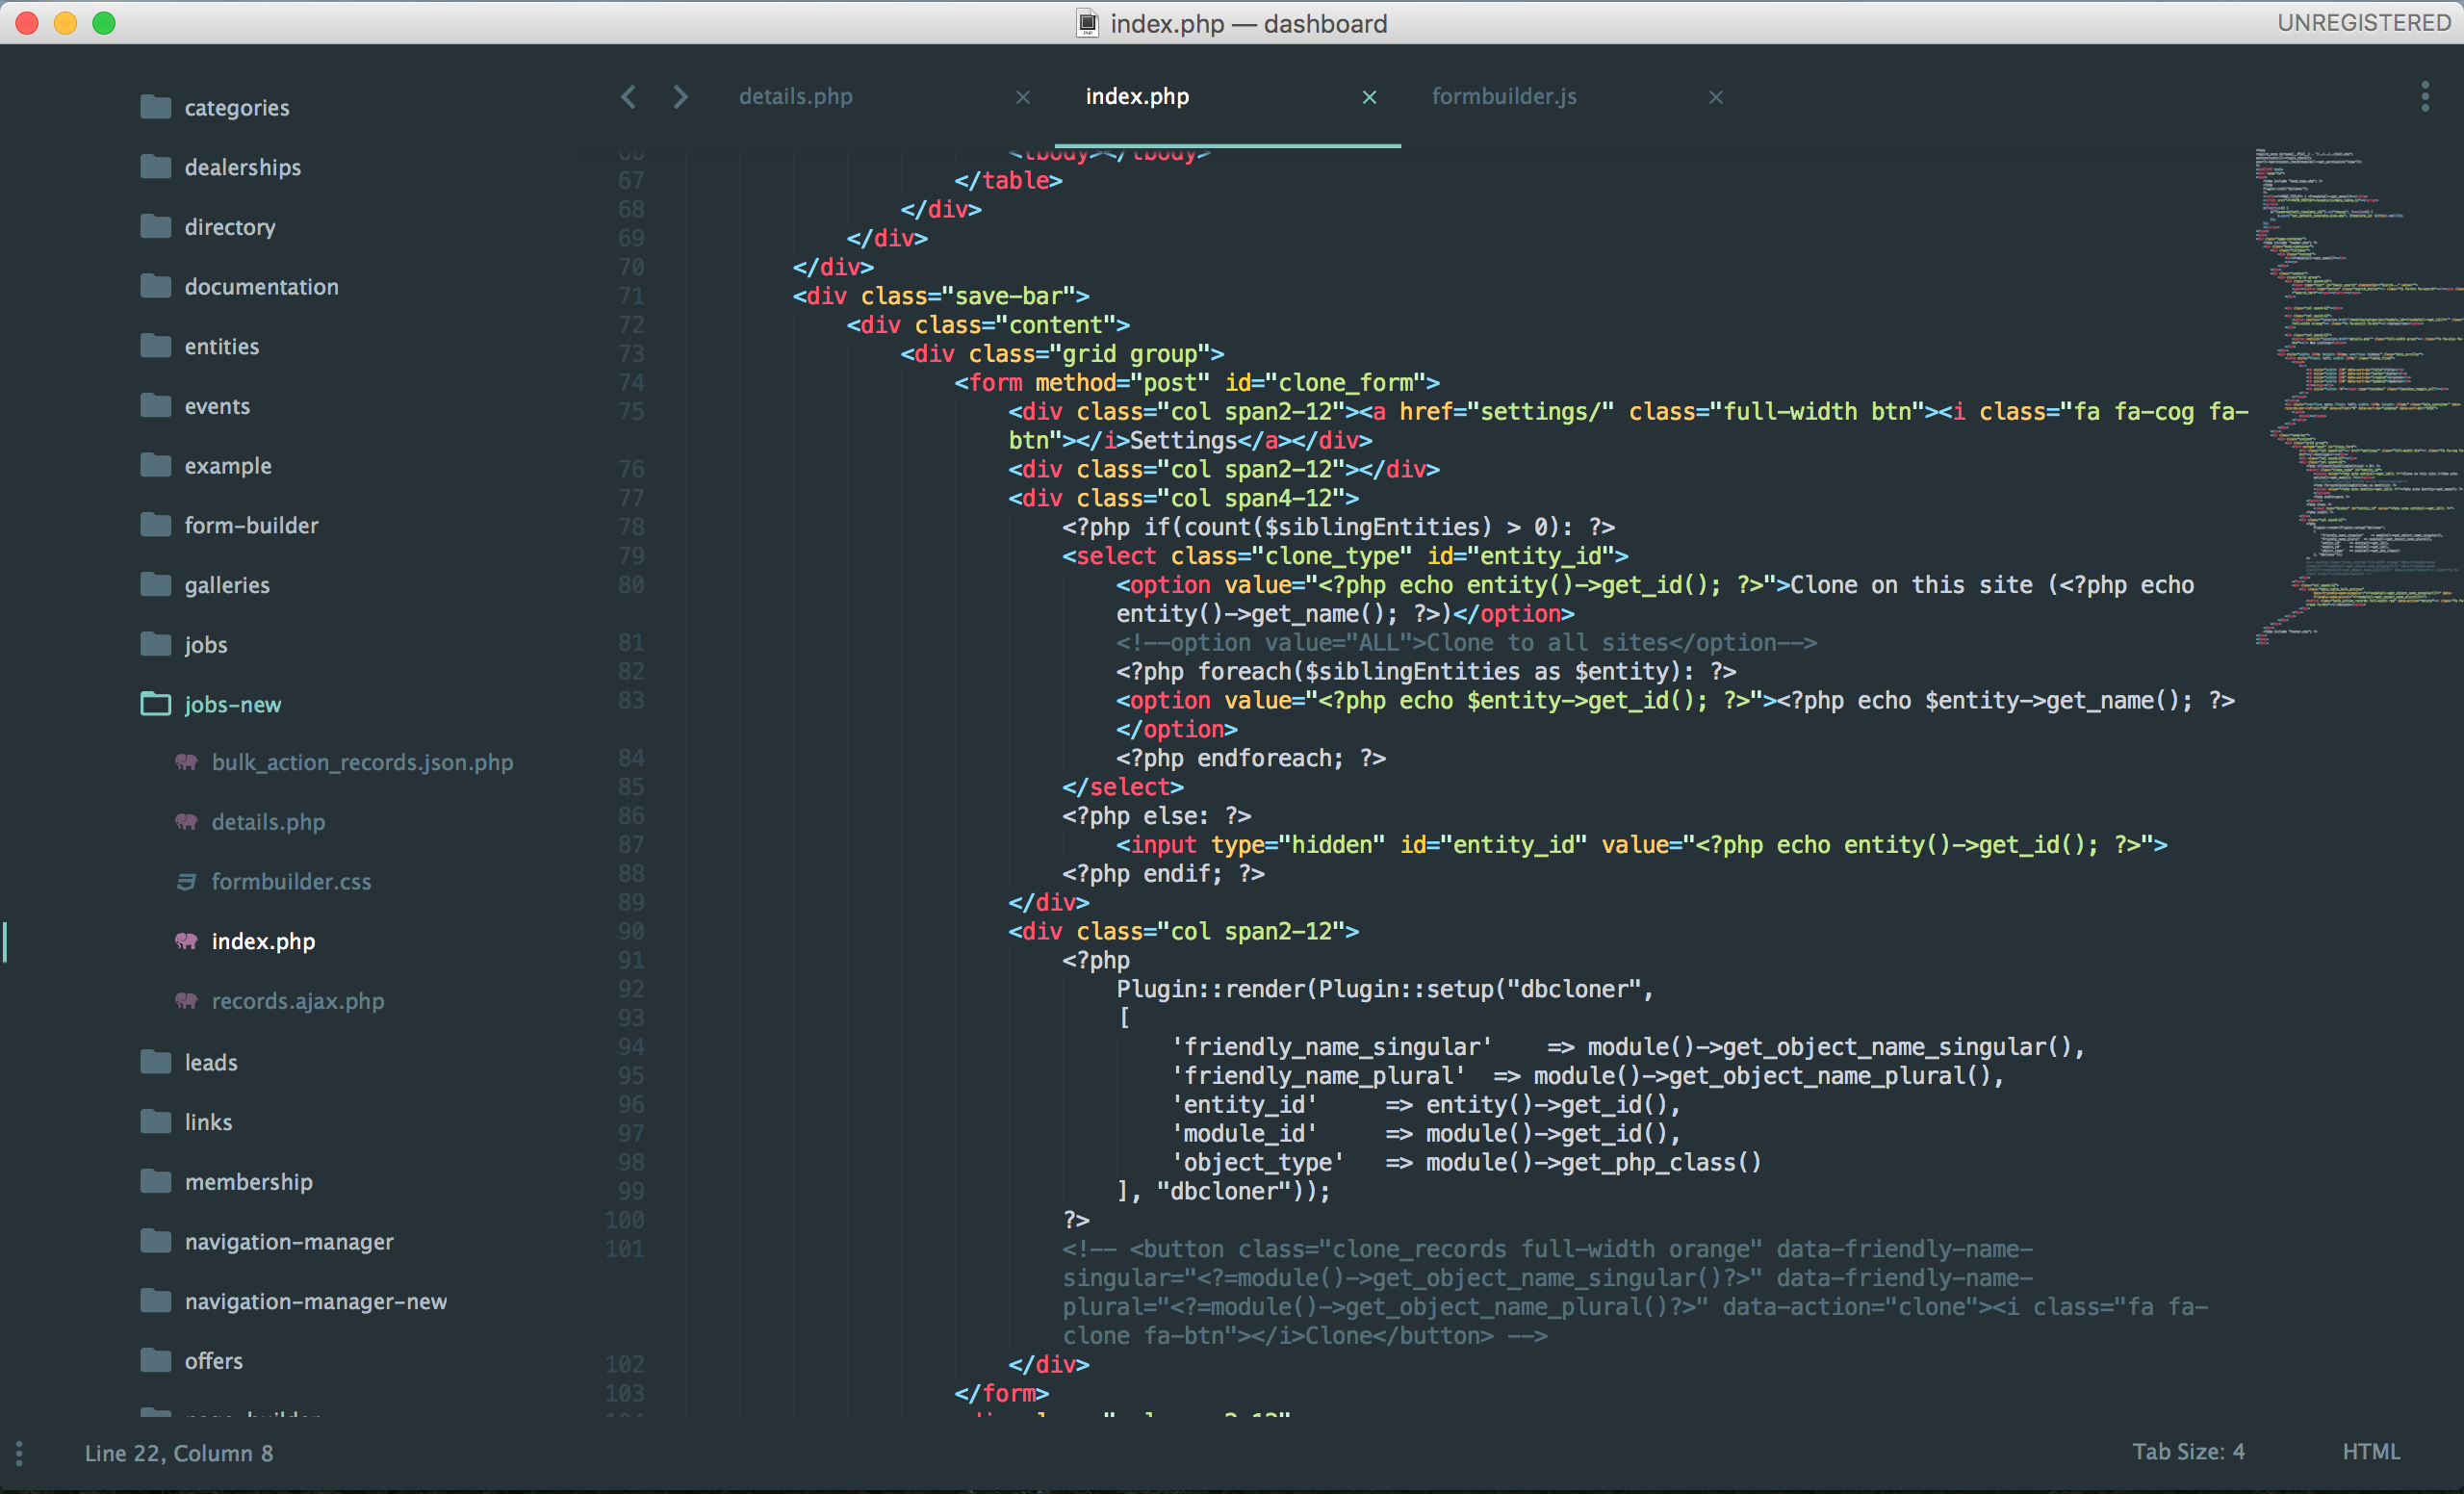 sublime text 3 editor for developers to work like a pro